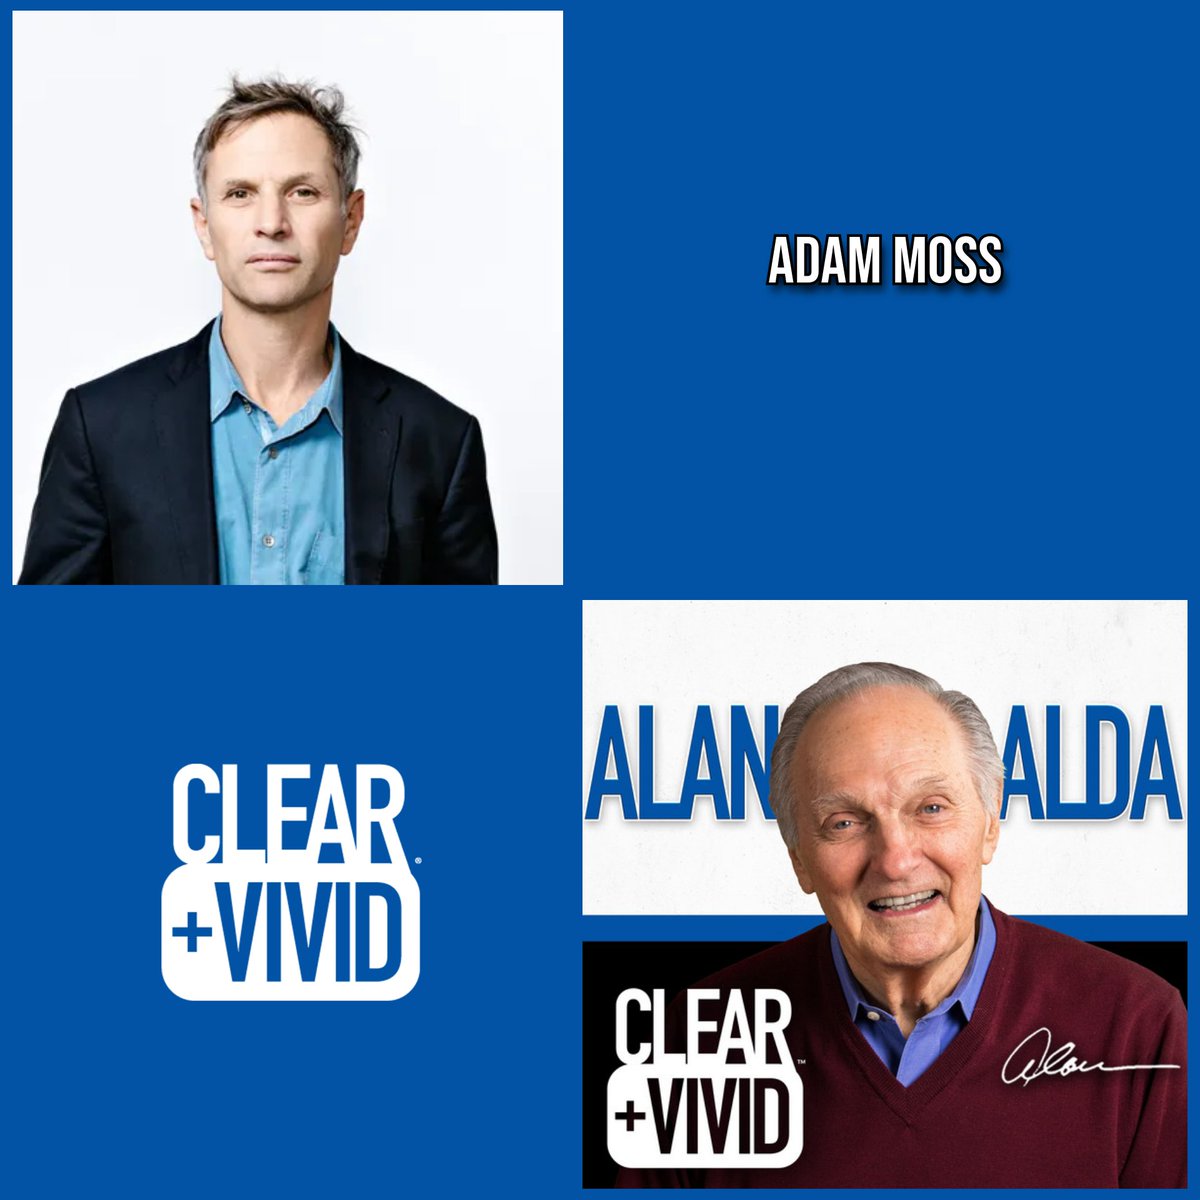 Tomorrow is PODCAST DAY! @AlanAlda chats with award-winning magazine editor, Adam Moss, about his new book - 'The Work of Art'. Listen & subscribe here: bit.ly/3tR21Gs After production costs, all proceeds of Clear+Vivid go to @AldaCenter.🗣️💙